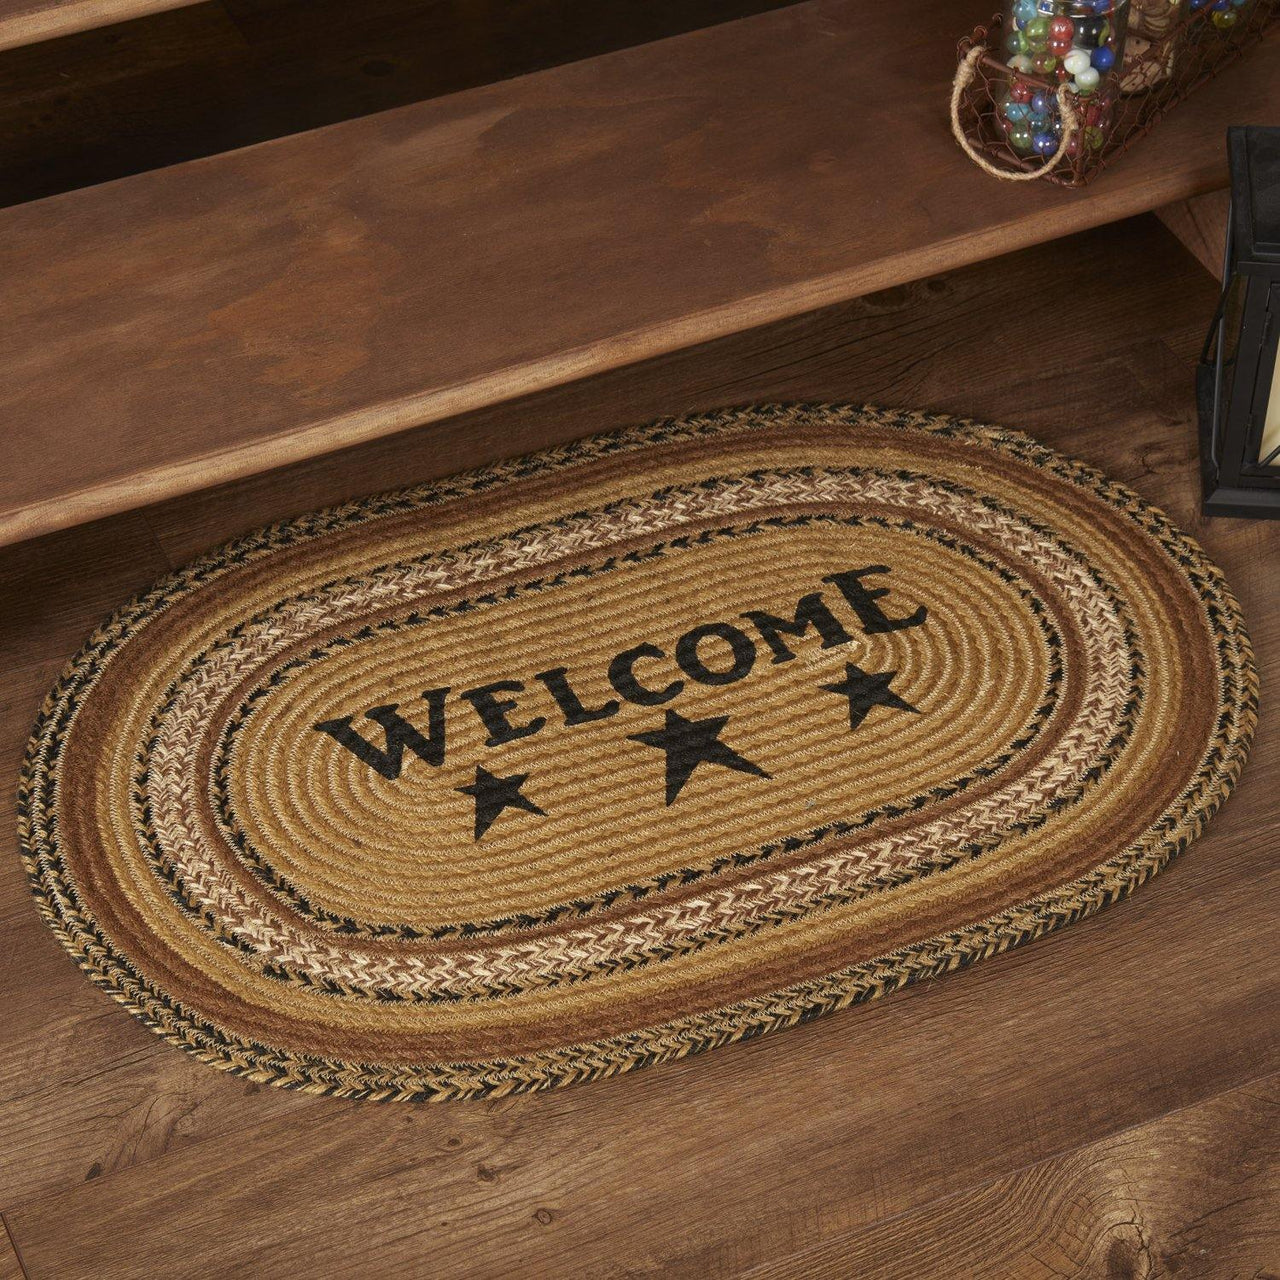 Kettle Grove Jute Rug Oval Stencil Star Welcome 20"x30" with Rug Pad VHC Brands - The Fox Decor